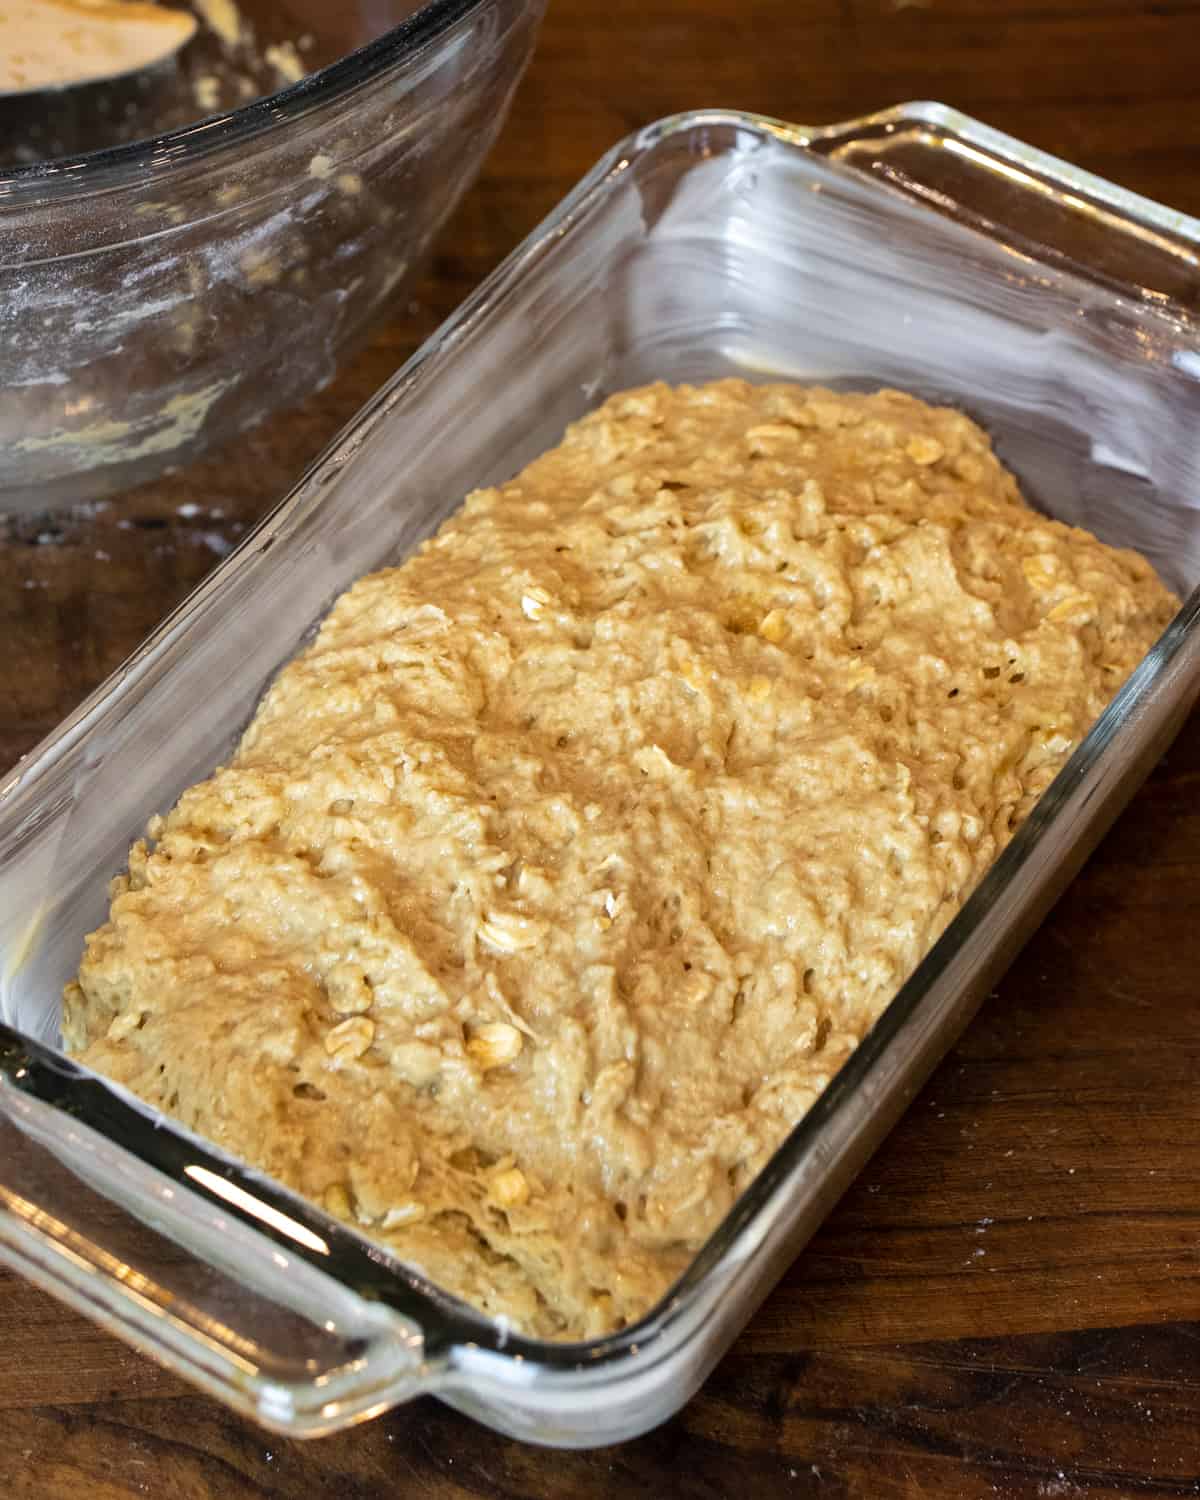 Loaf batter spread into a greased glass dish.